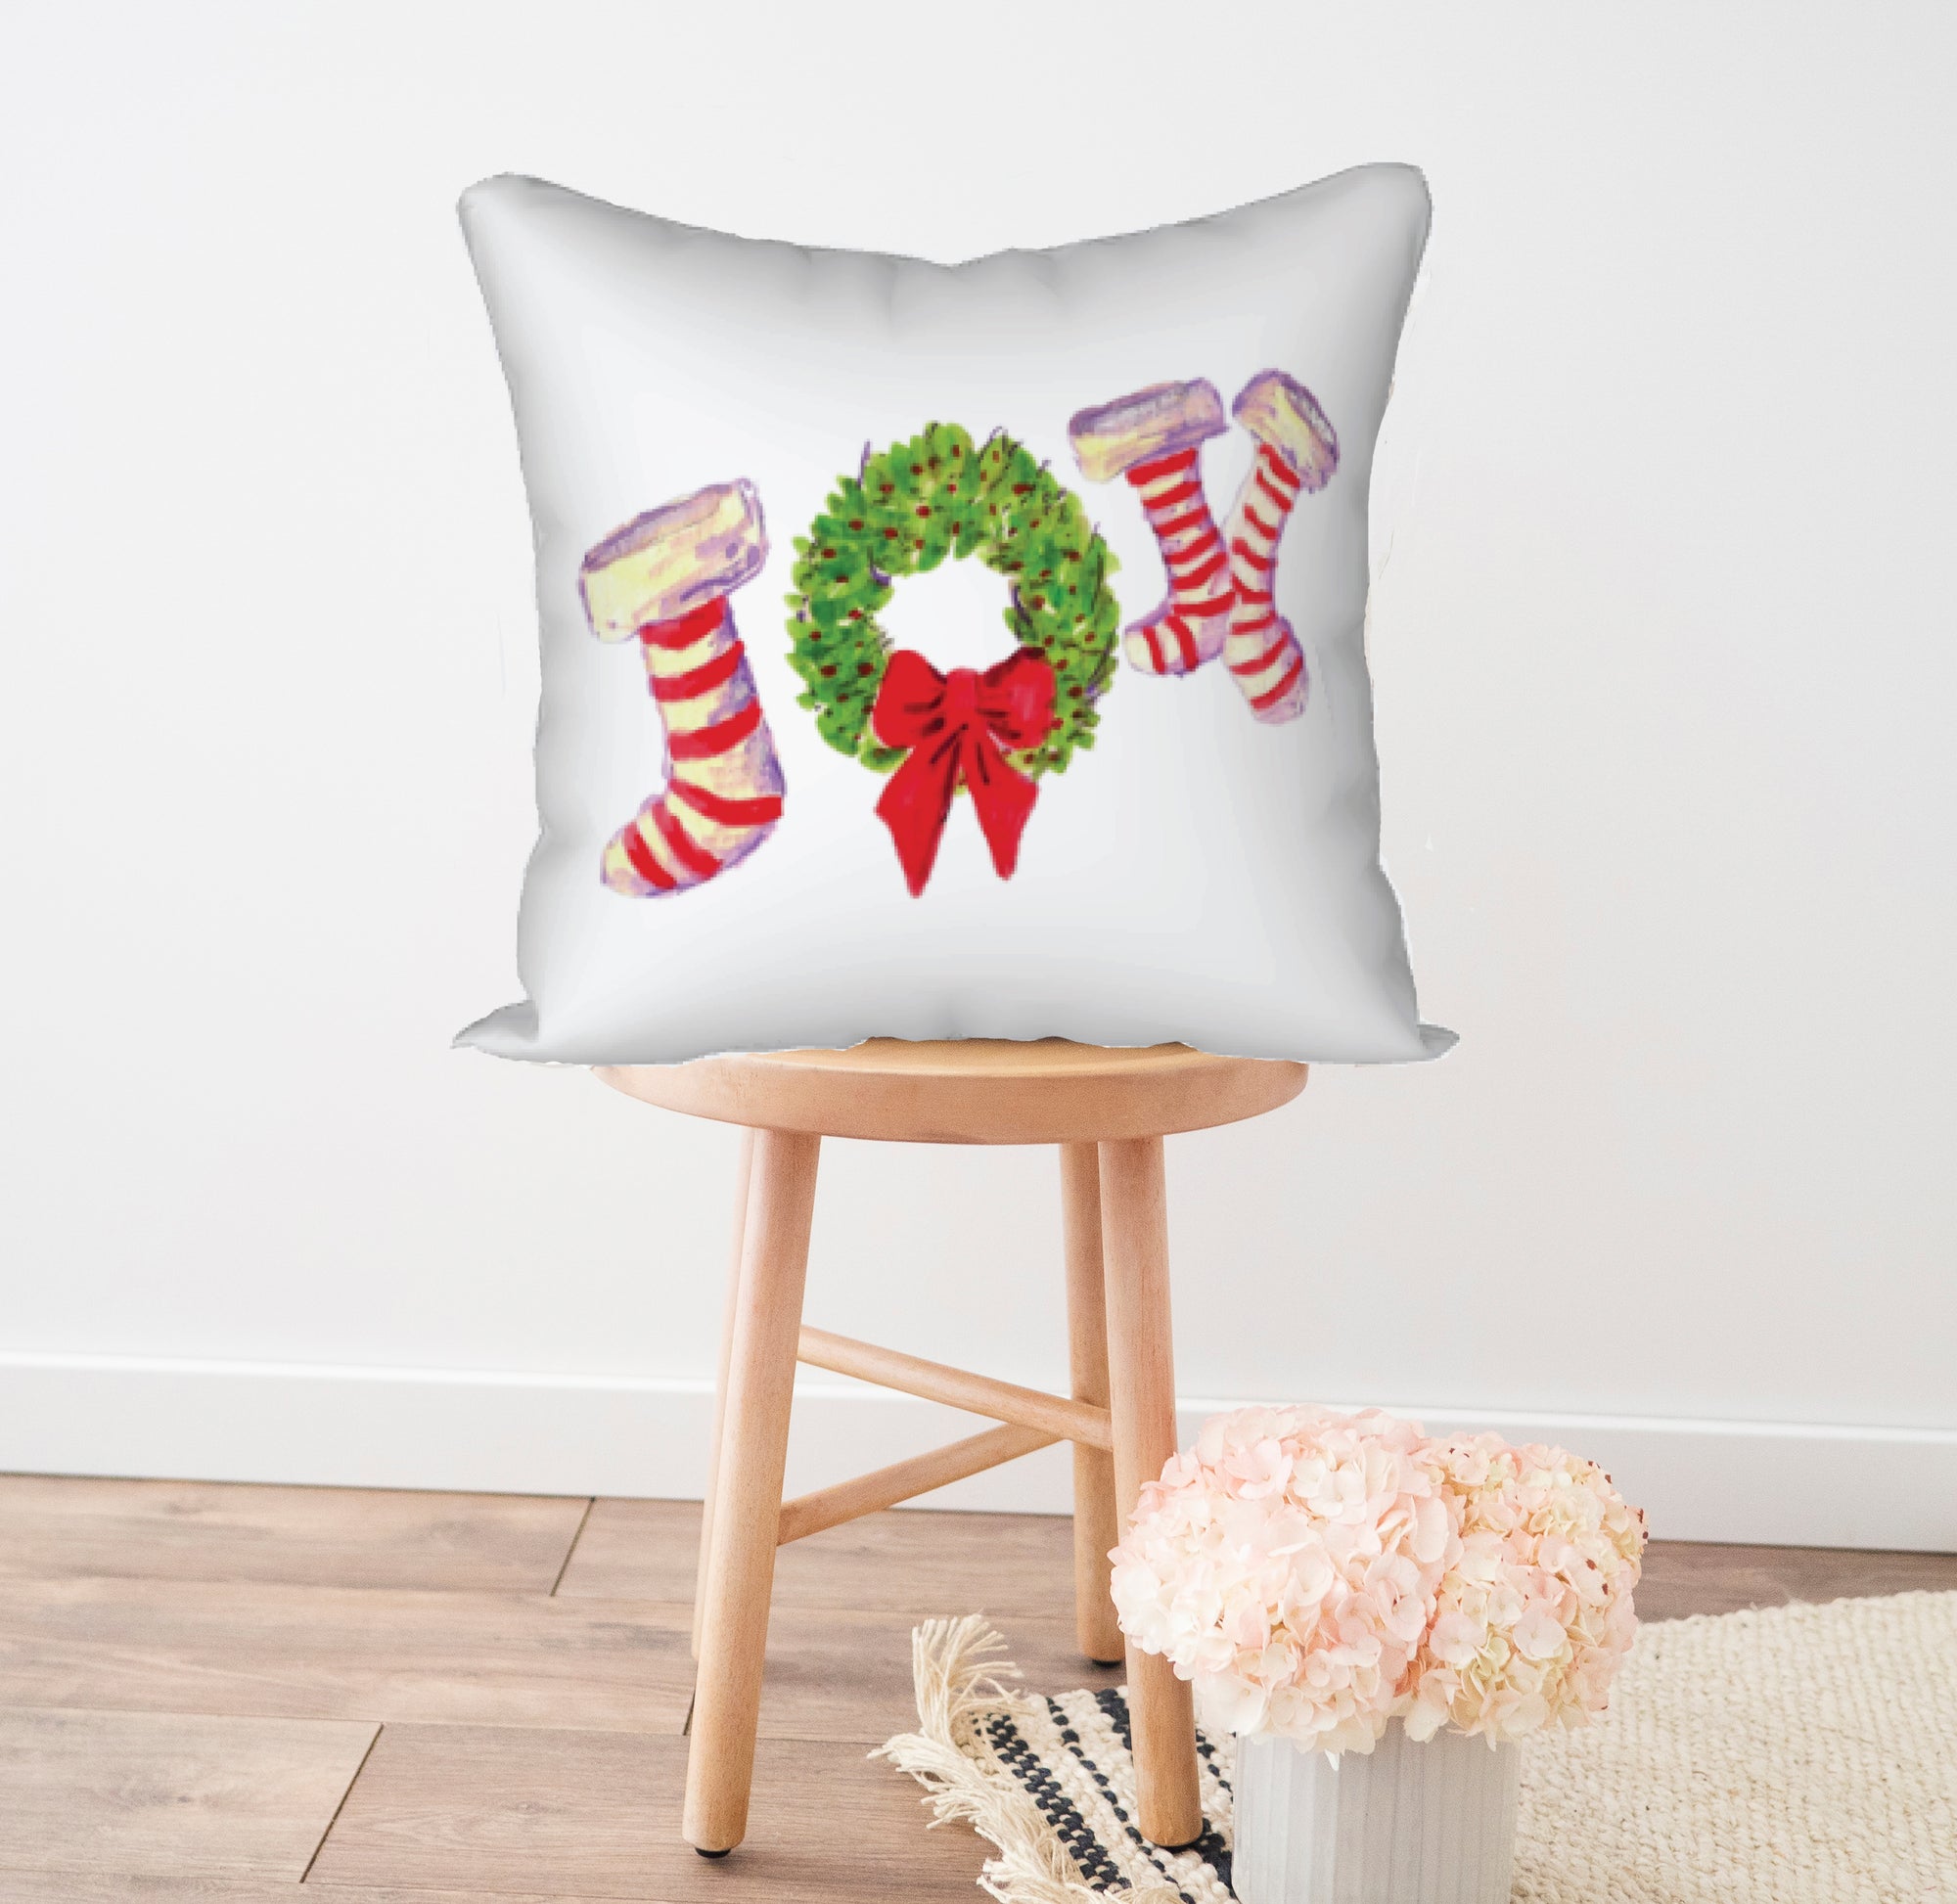 Joy to the World with this festive Joy Pillow. Watercolor image printed onto this square pillow. Will add a pop of festivity to any Christmas Holiday. There is a wreath painted in the middle of the two stocking letters to create the word JOY. White background with red and white striped stockings.